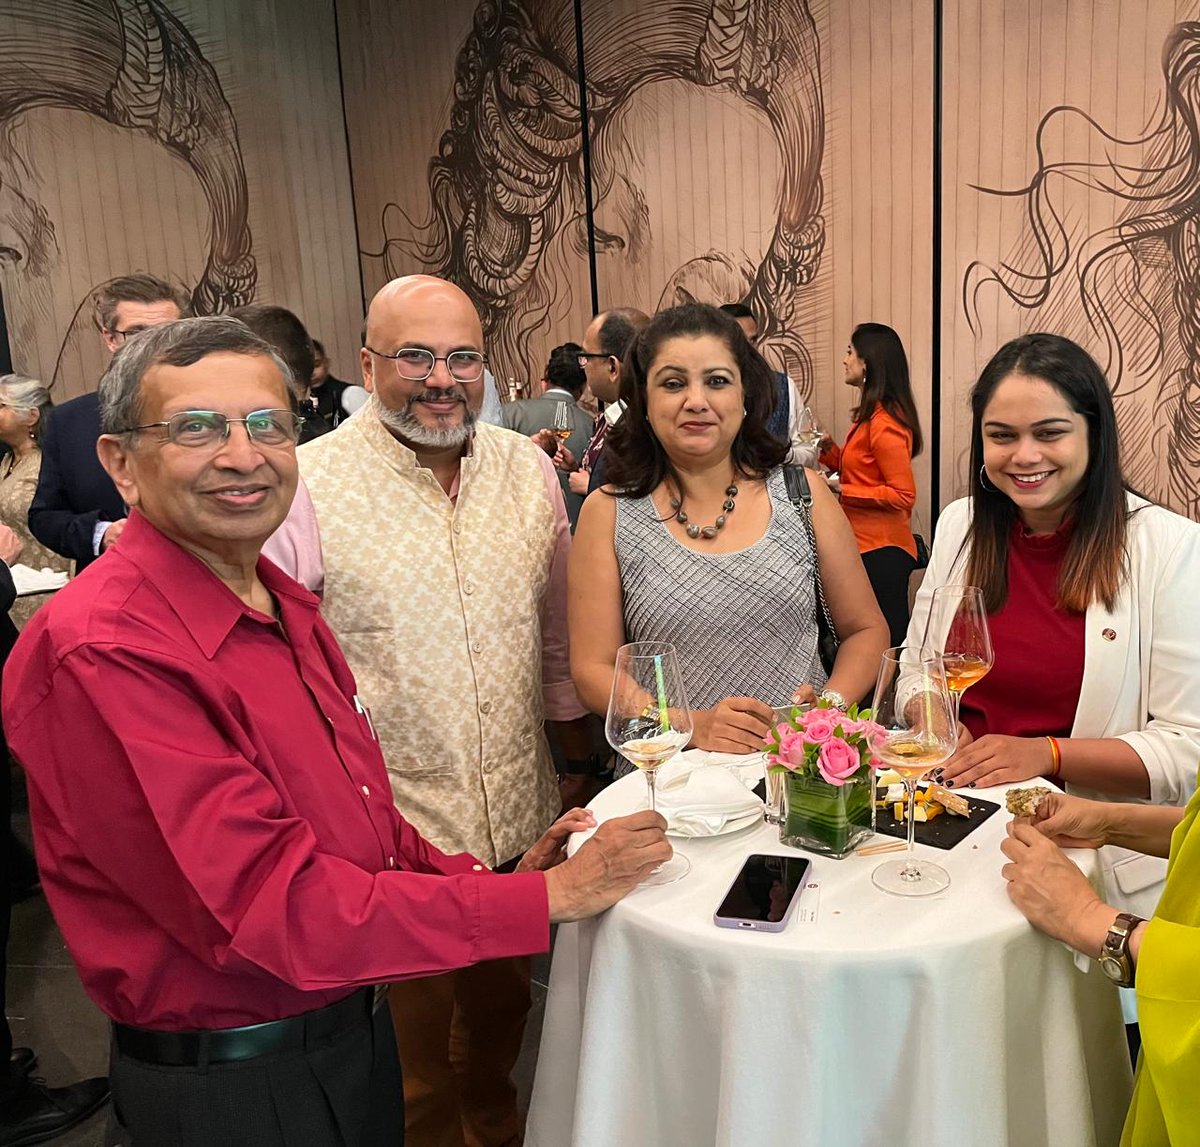 Celebrated cooperation between 🇦🇺 & 🇮🇳 wine industries in #Mumbai with @AusGrapeWine & @AustradeIndia. Was also delighted to meet 🇮🇳's only Master of Wine @SonalHolland! 🇦🇺 is working with 🇮🇳 to facilitate growing🍷 #biz between the 2 countries.